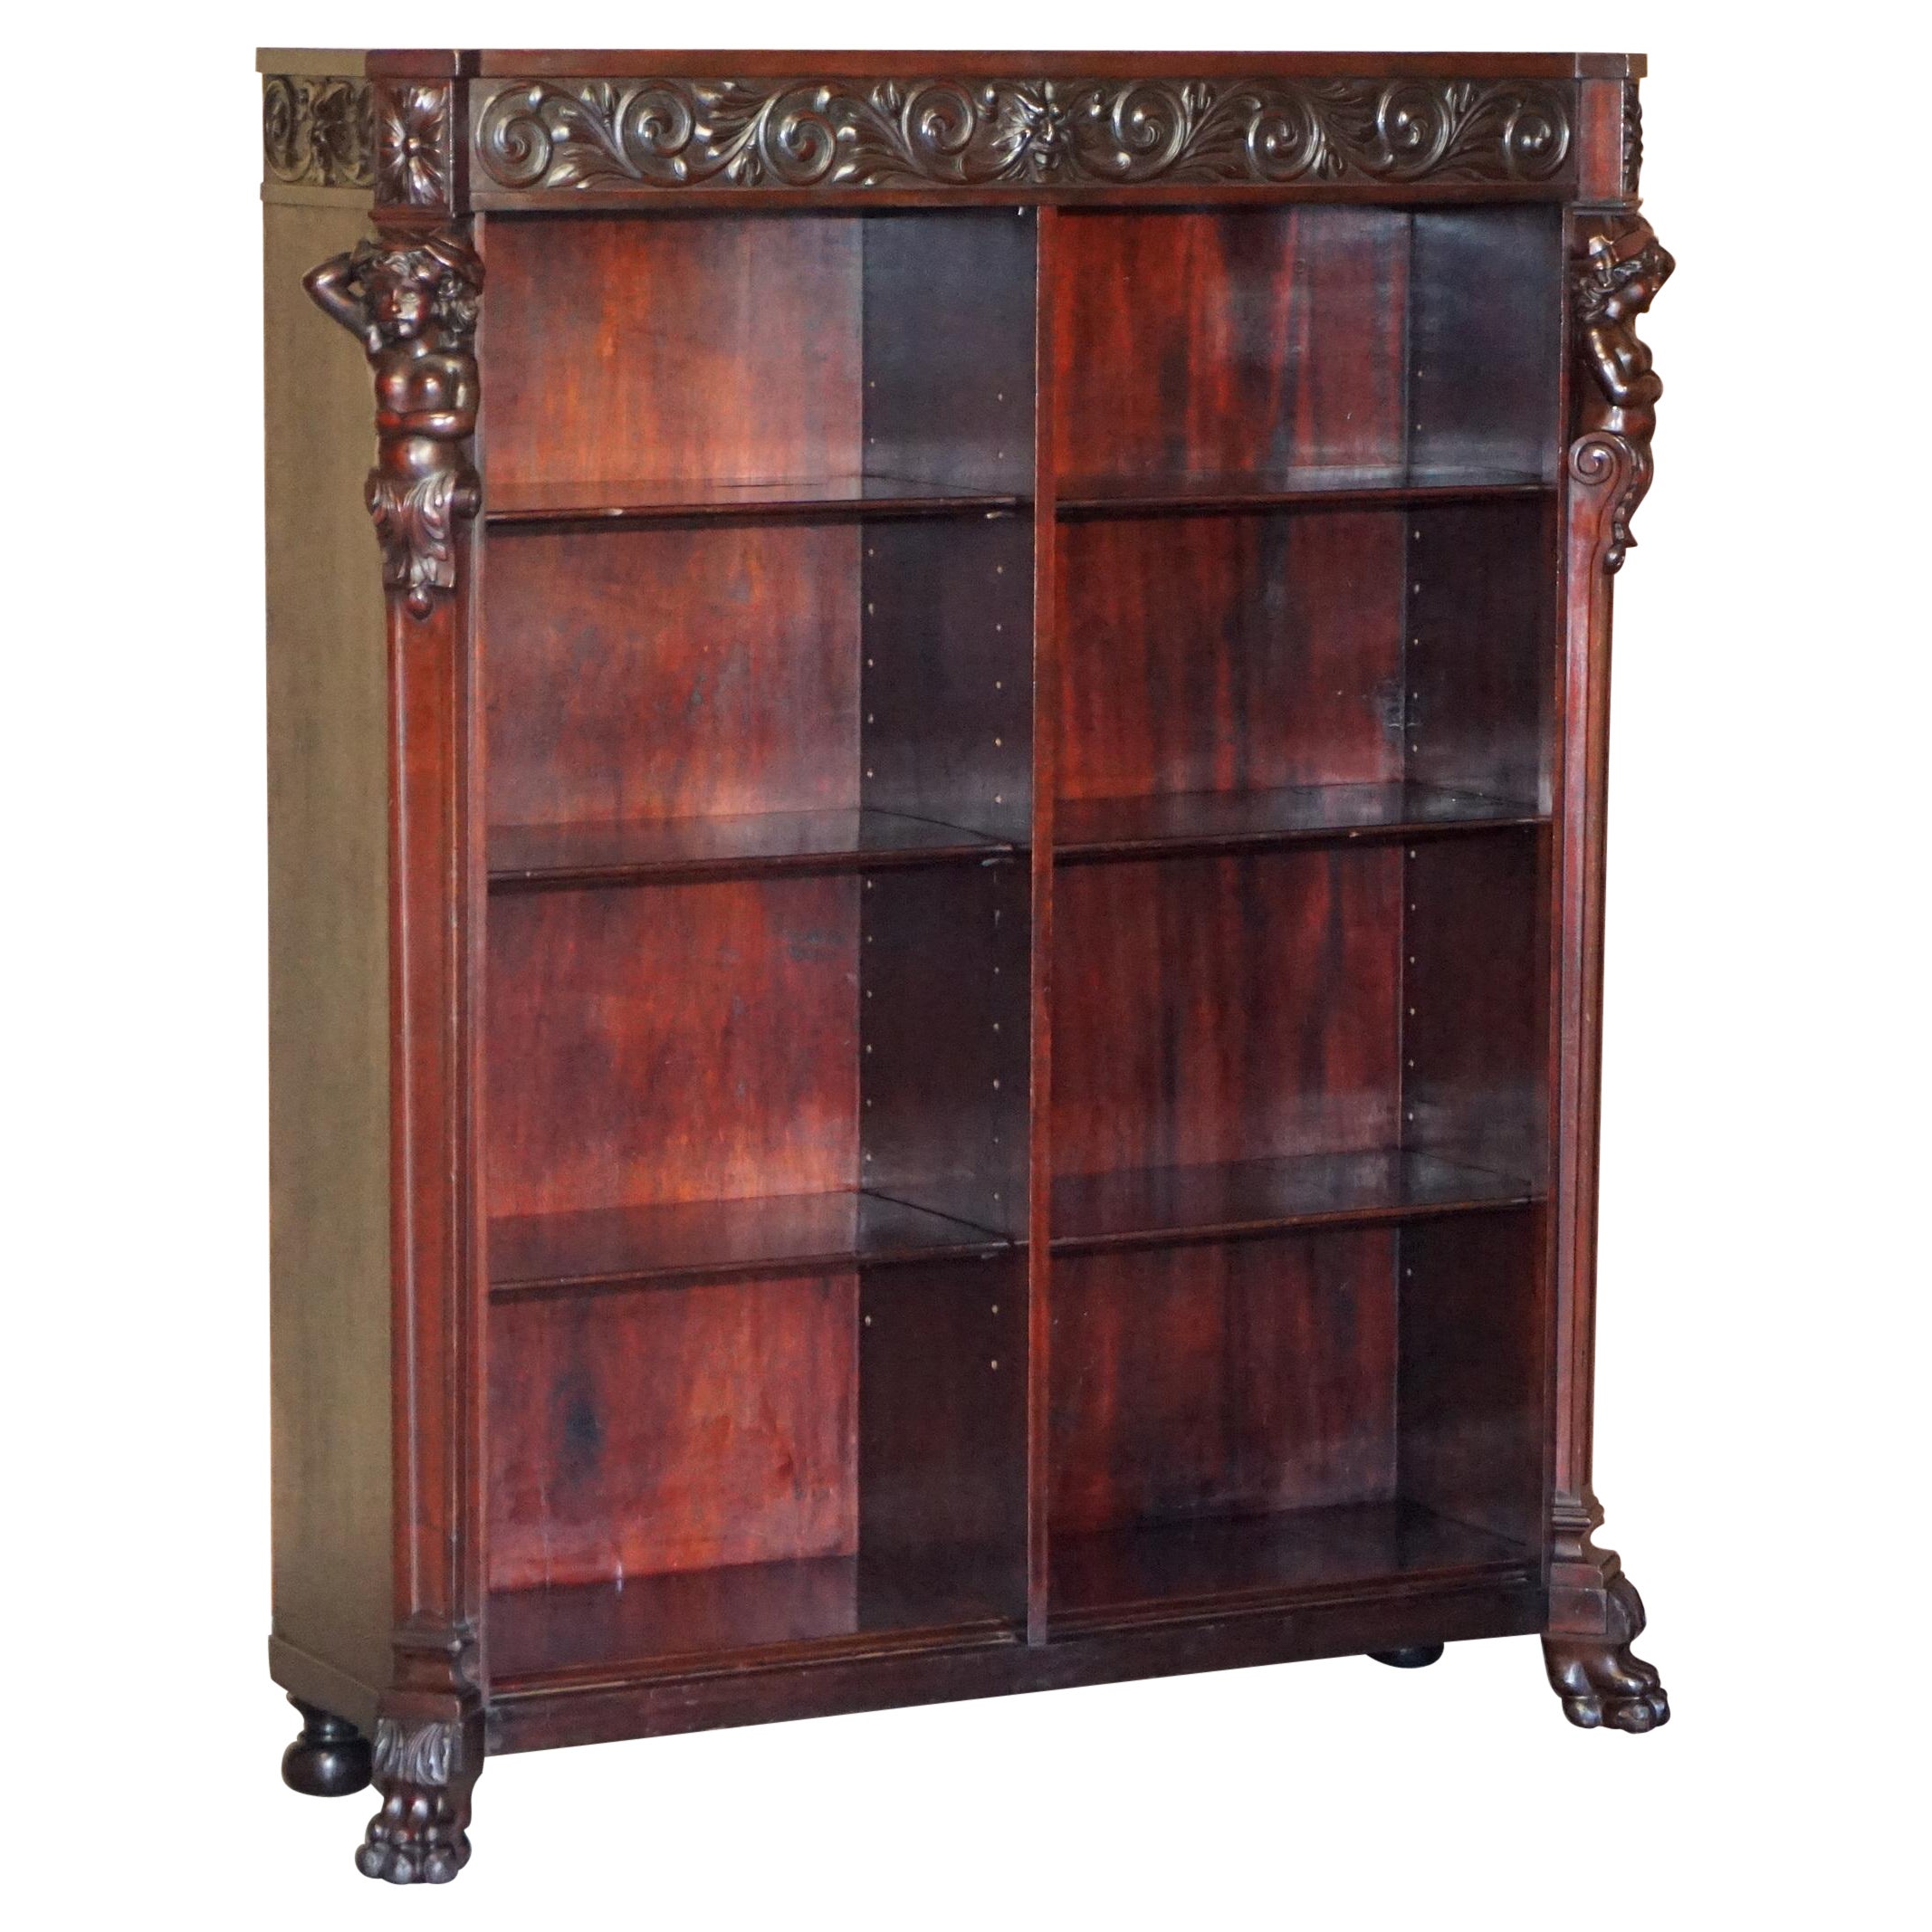 Lovely circa 1900 Hand Carved Library Bookcase in Hardwood with Herm Statues For Sale